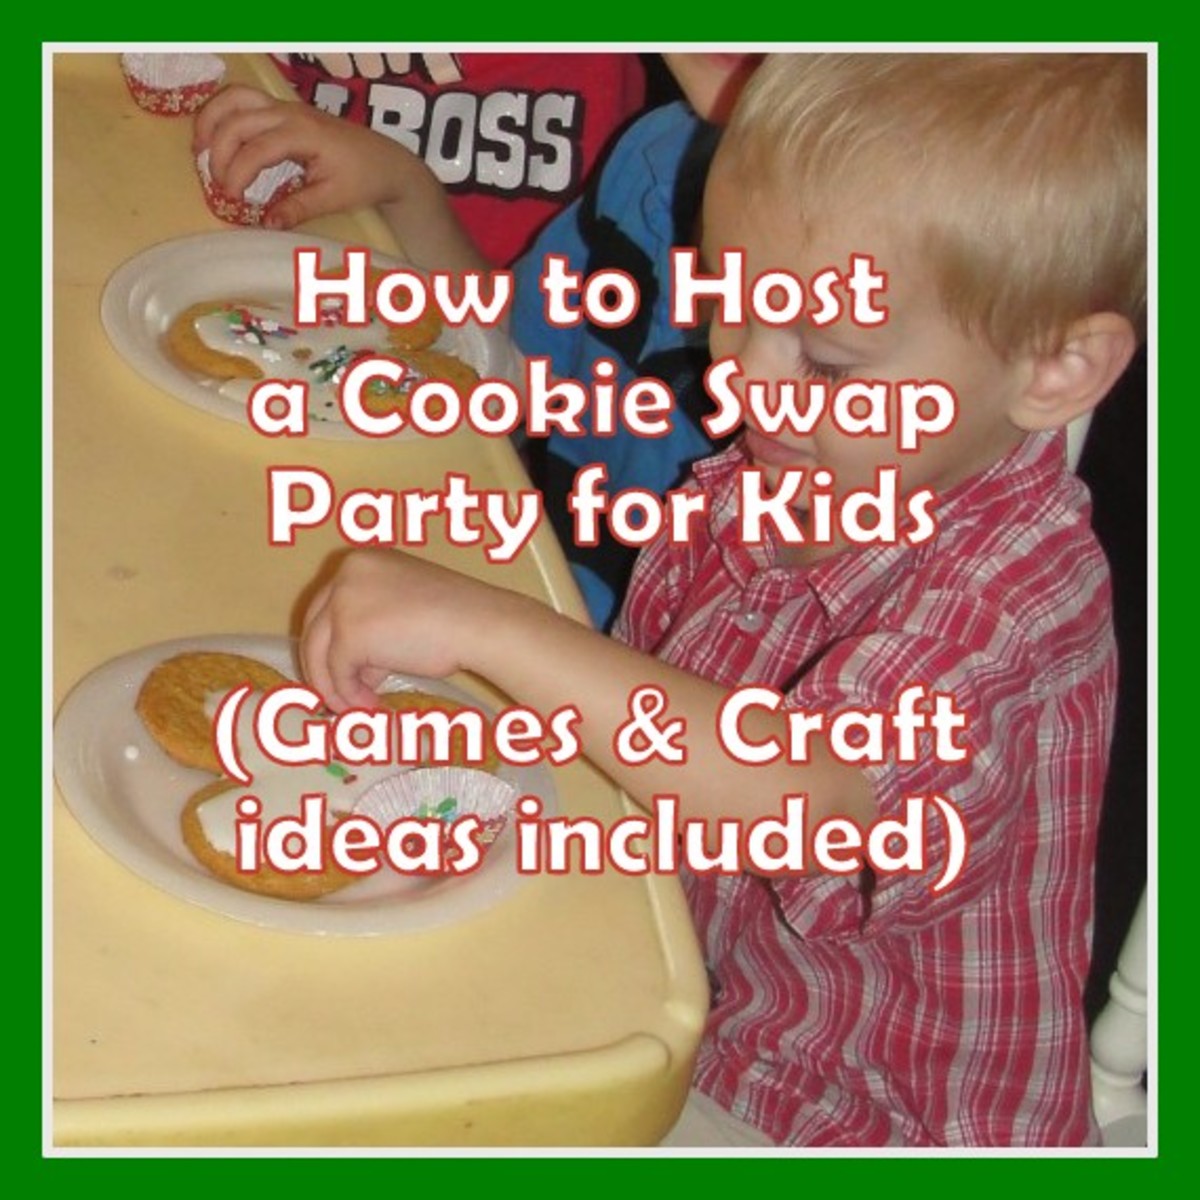 How to Host a Simple Christmas Cookie Swap Party for Kids